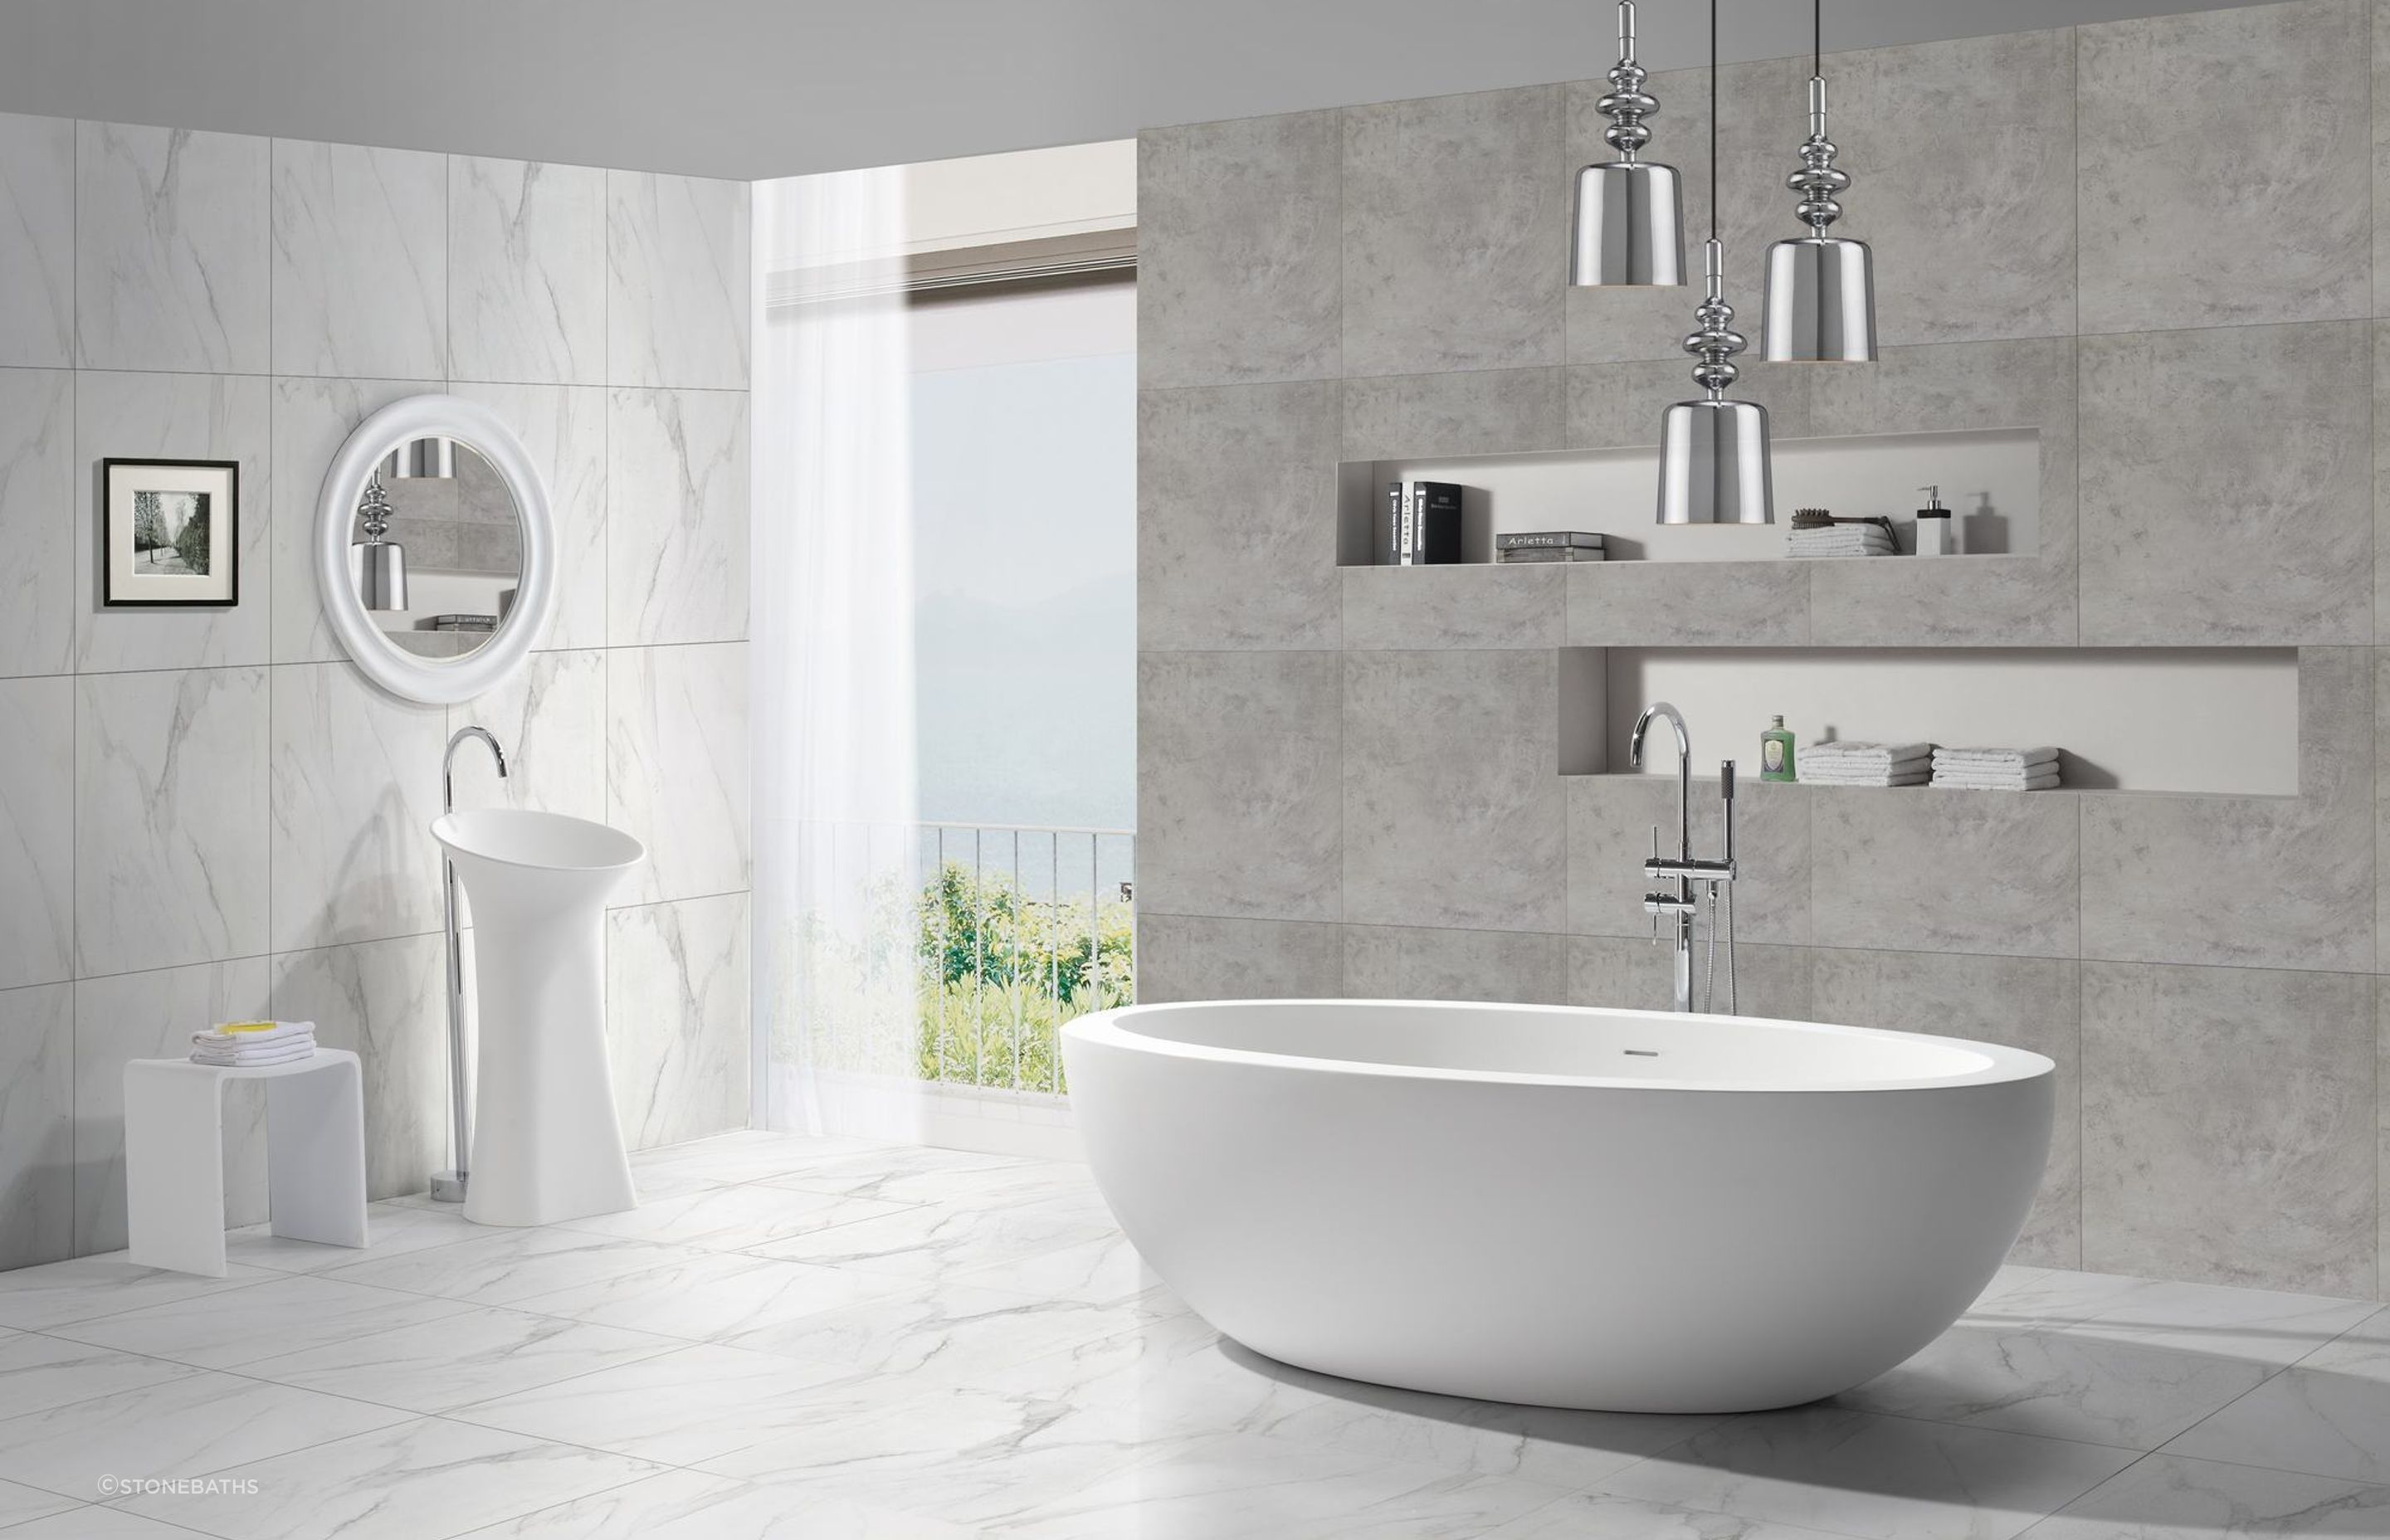 Bathroom accessories add style and function to a bathroom.